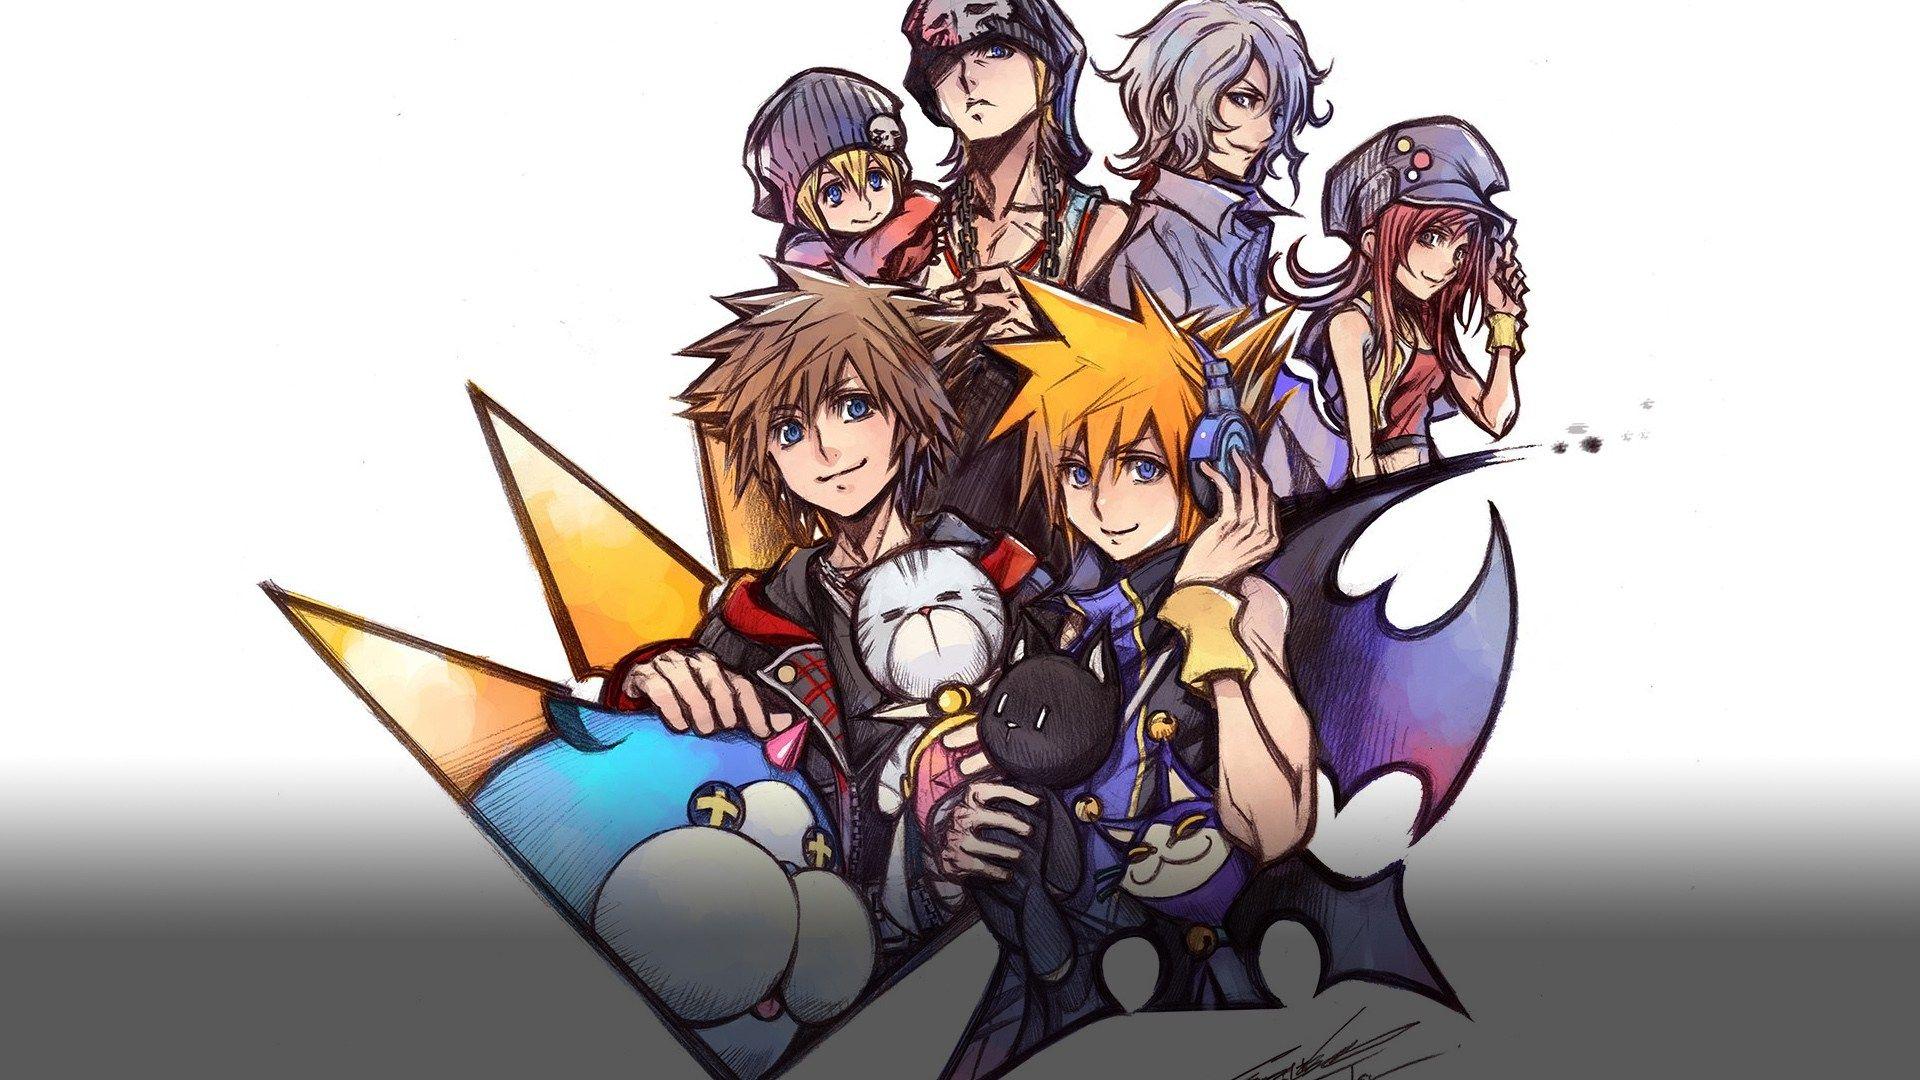 Kingdom Hearts and The World Ends With You come together in new art